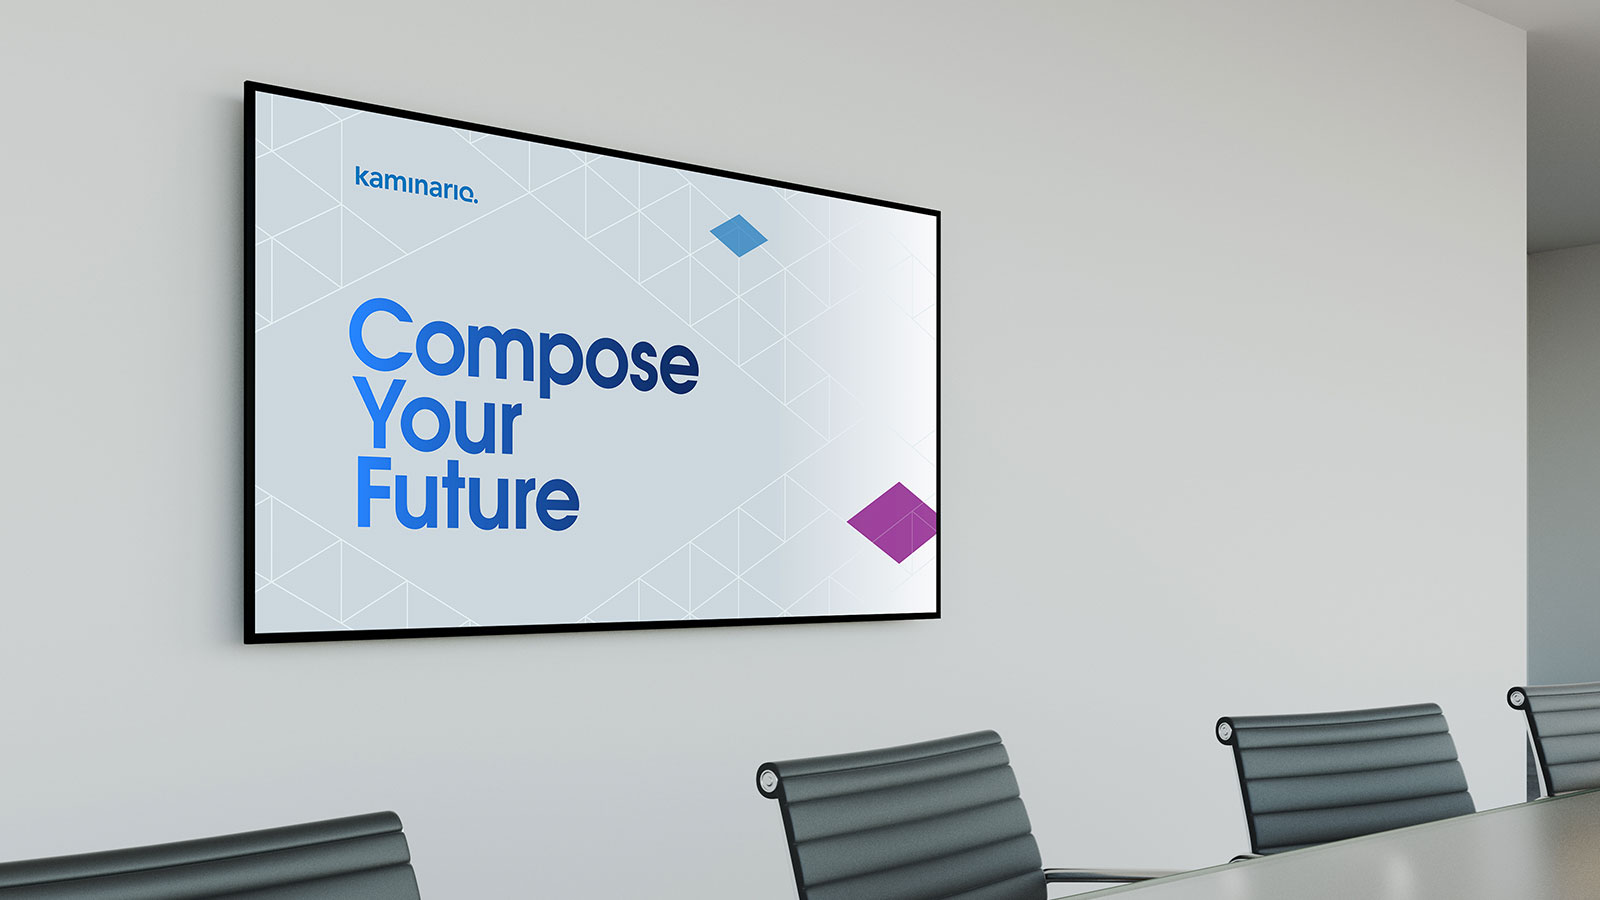 Kaminario Creative Campaigns – "Compose Your Future" Powerpoint Title Slide